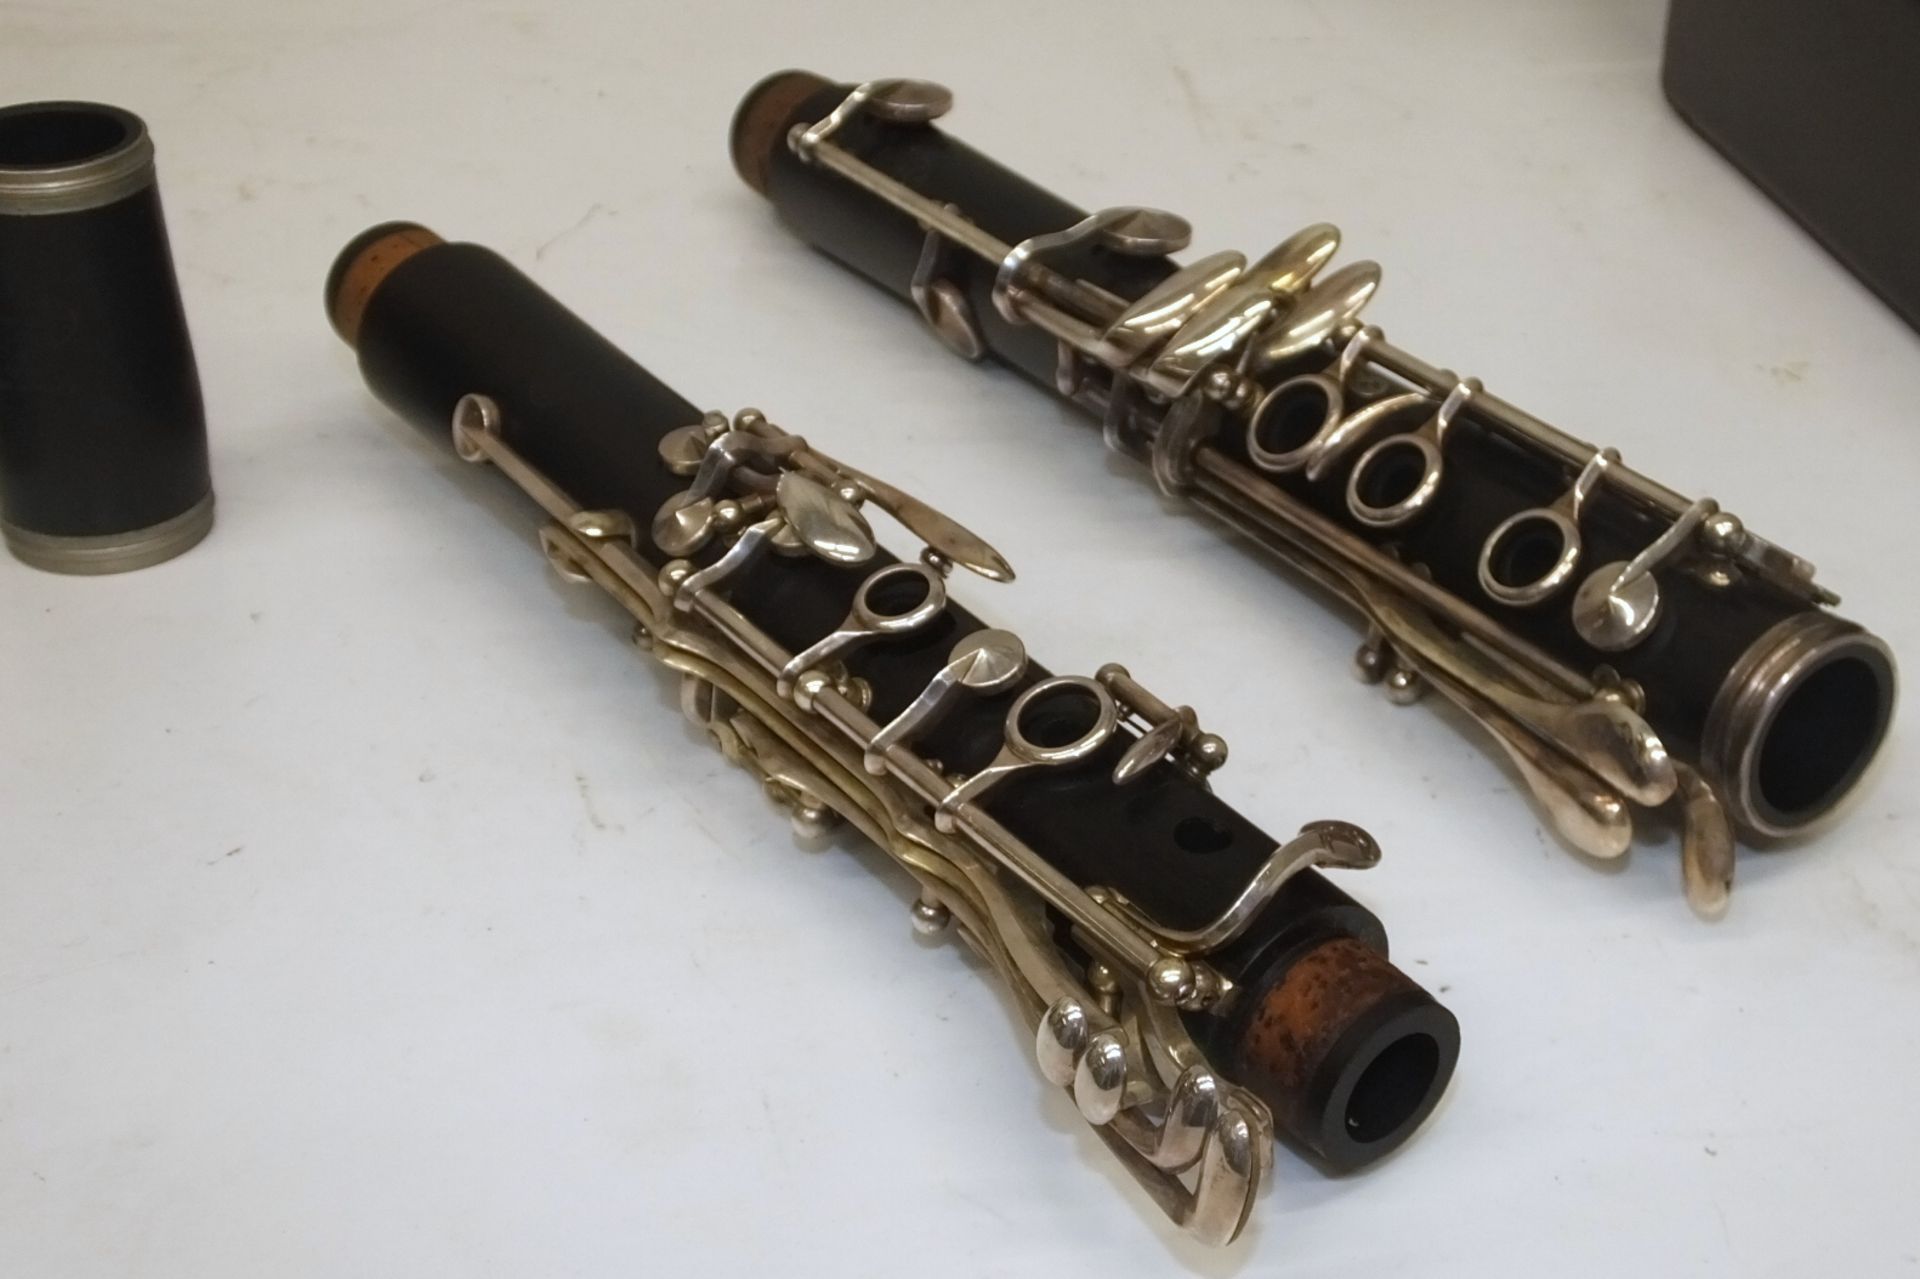 Buffet Crampon Clarinet (A) - Serial Number - 296051 - Image 4 of 11